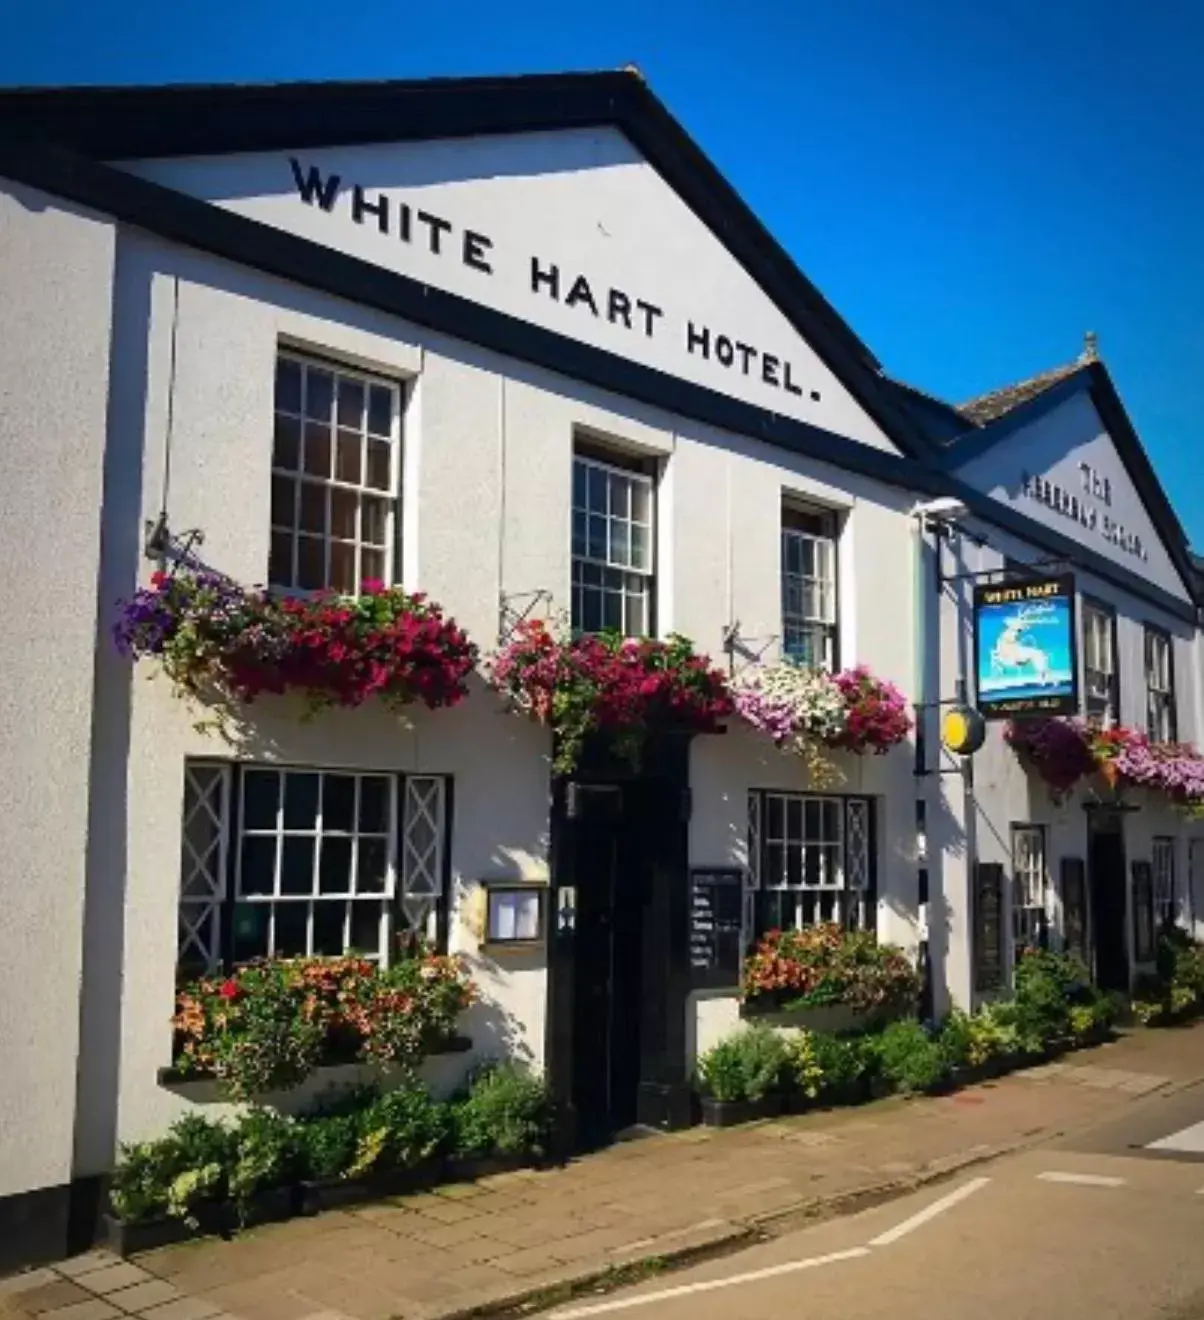 Property Building in The White Hart Hotel